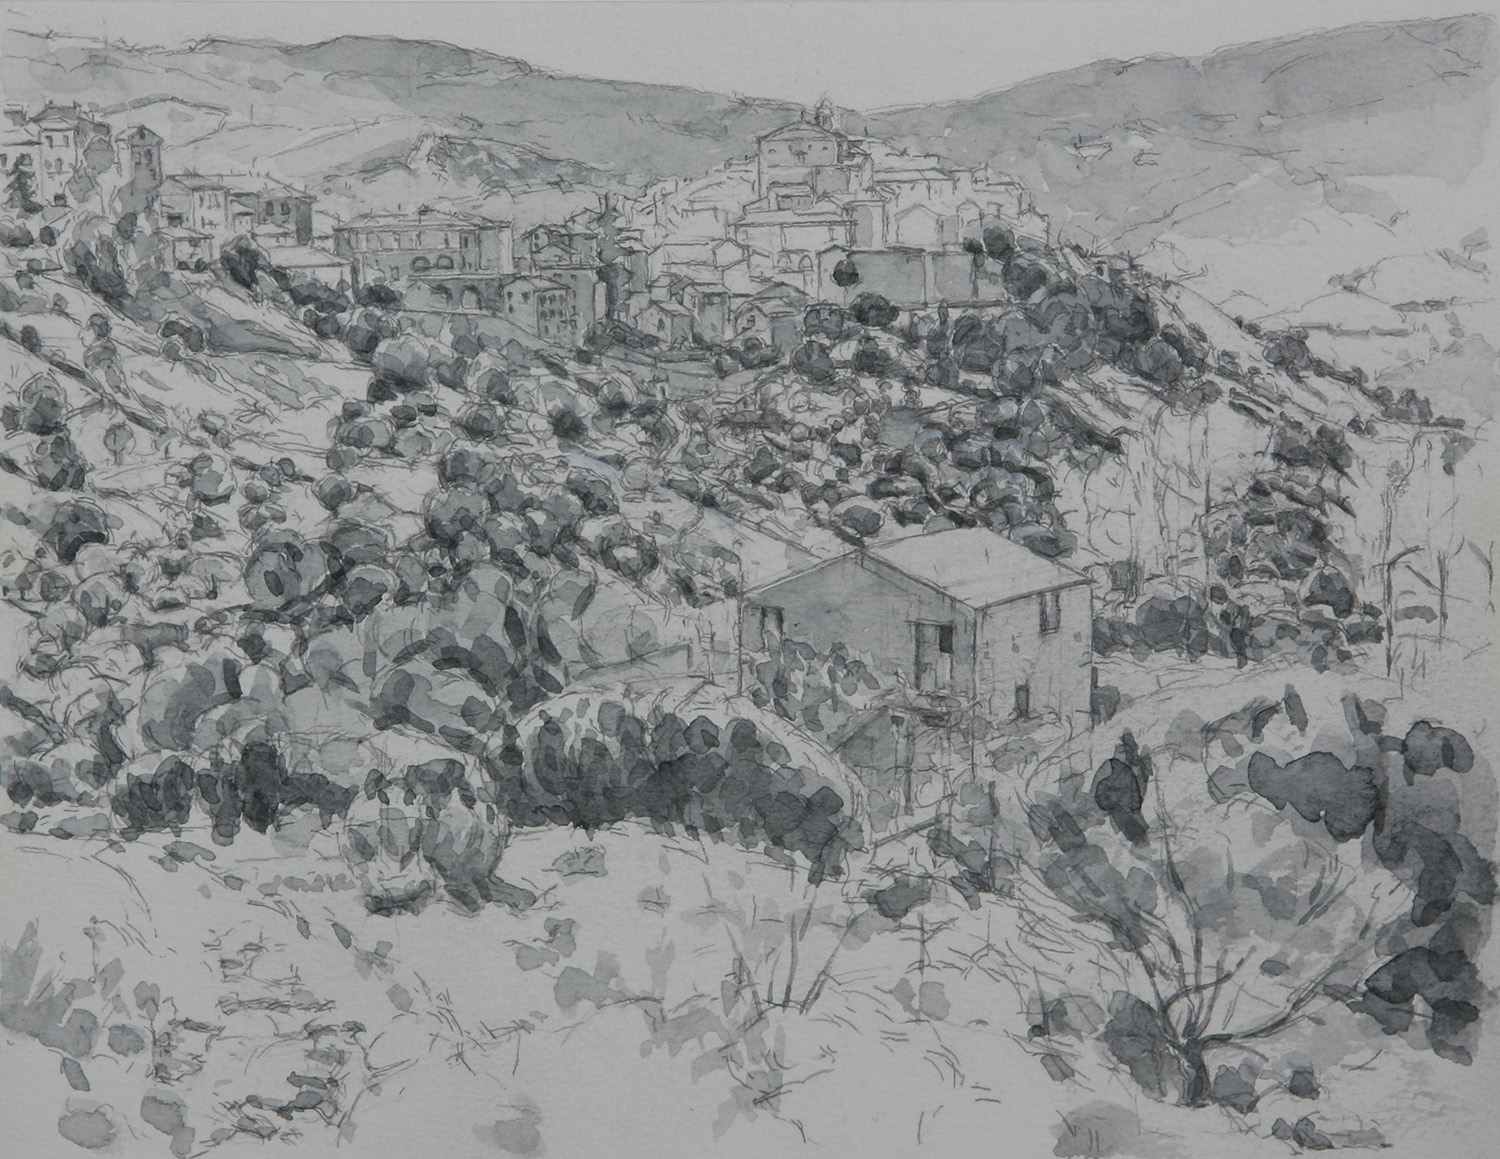 Tratturo, study by Frederick Ortner (larger)